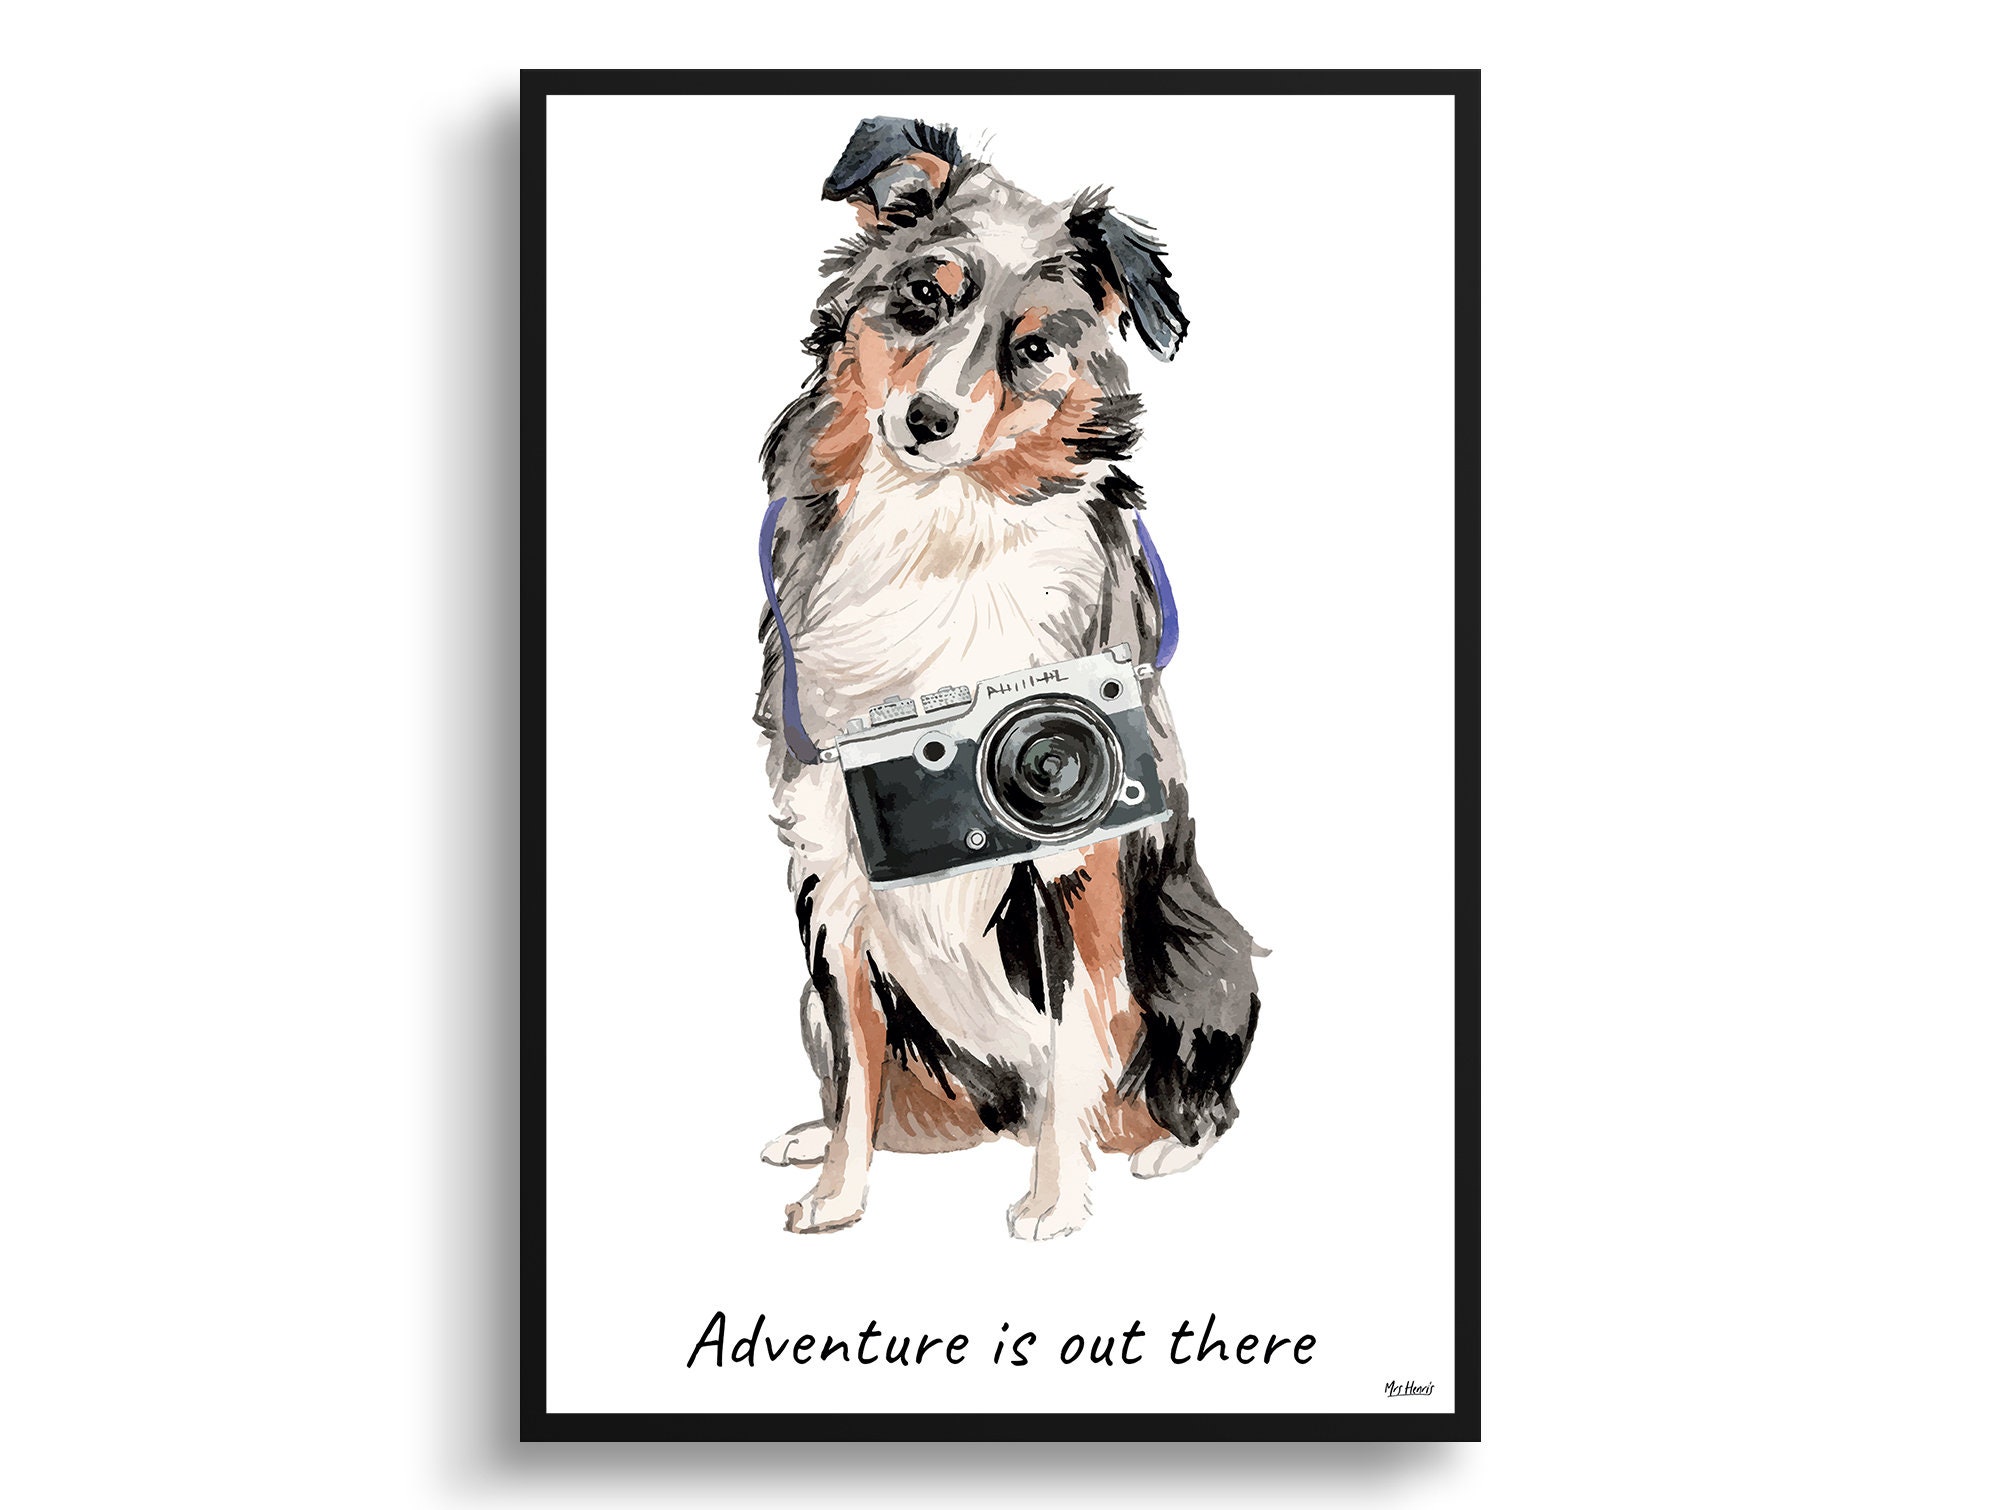 Adventure Is Out There Australian Shepherd Dog Print Illustration. Framed & Un-Framed Wall Art Options. Personalised Name